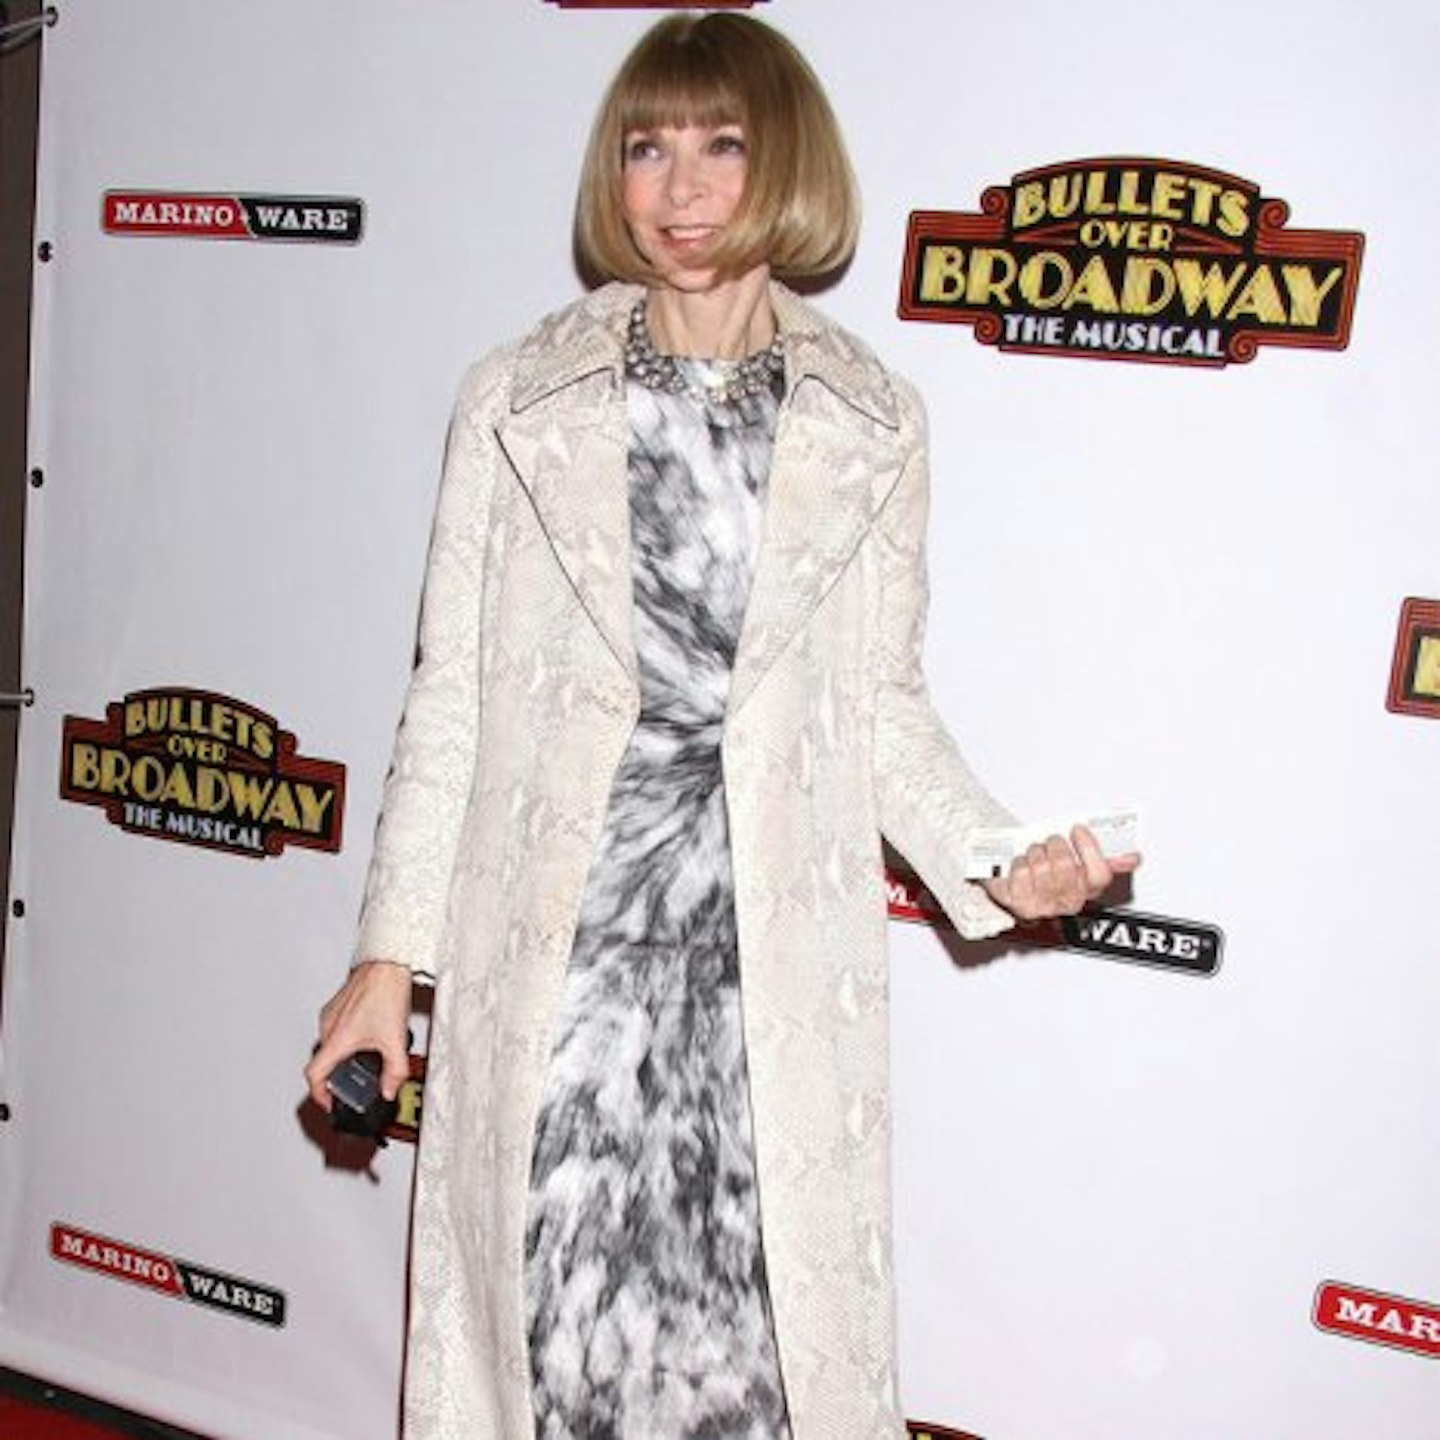 Anna Wintour is one of the school's famous alumni